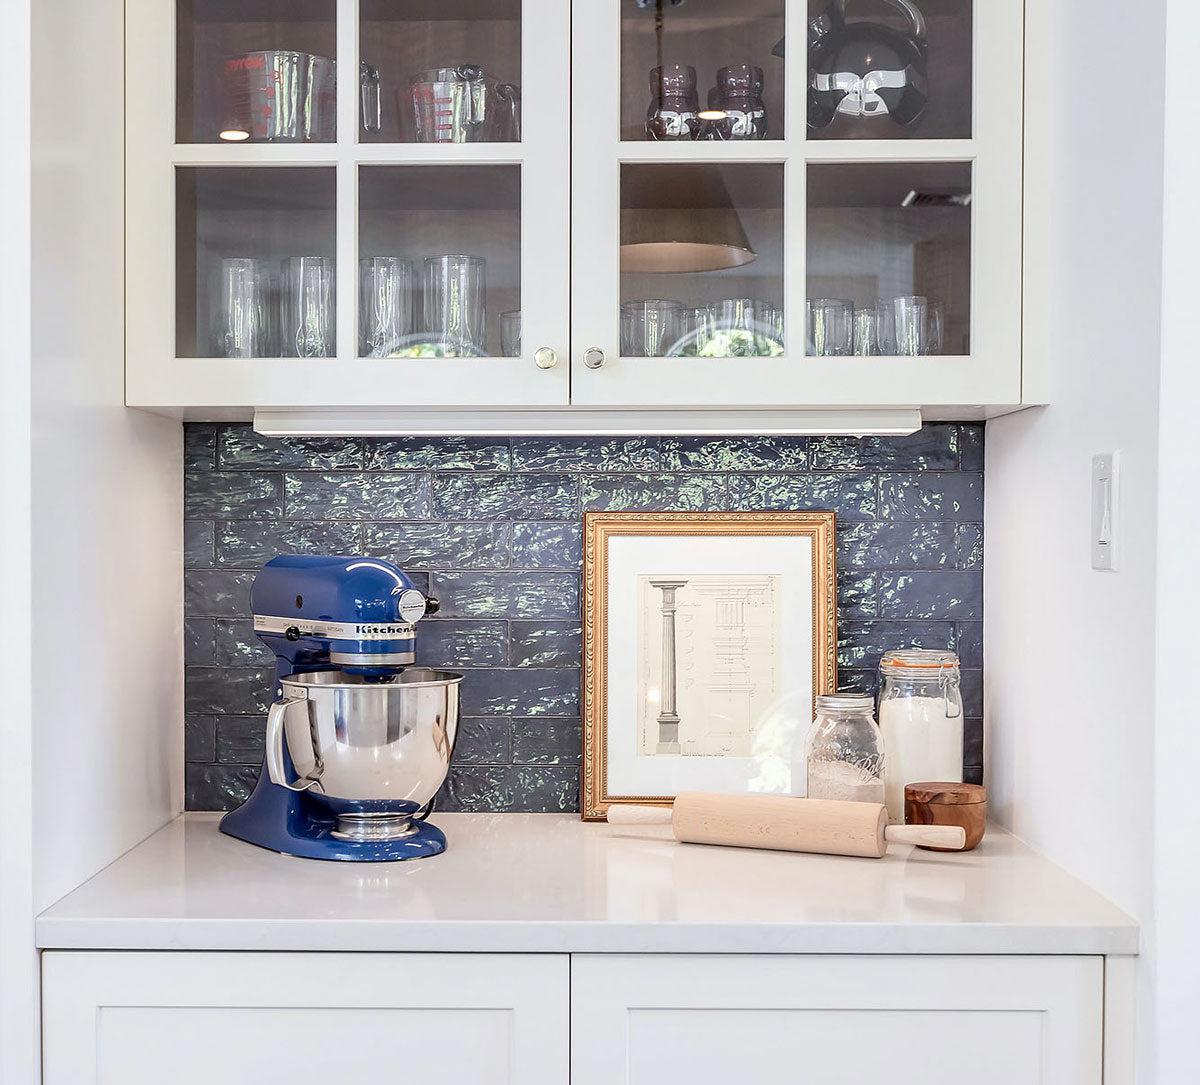 Kitchen pantry nook with a glossy blue ceramic subway tile kitchen wall